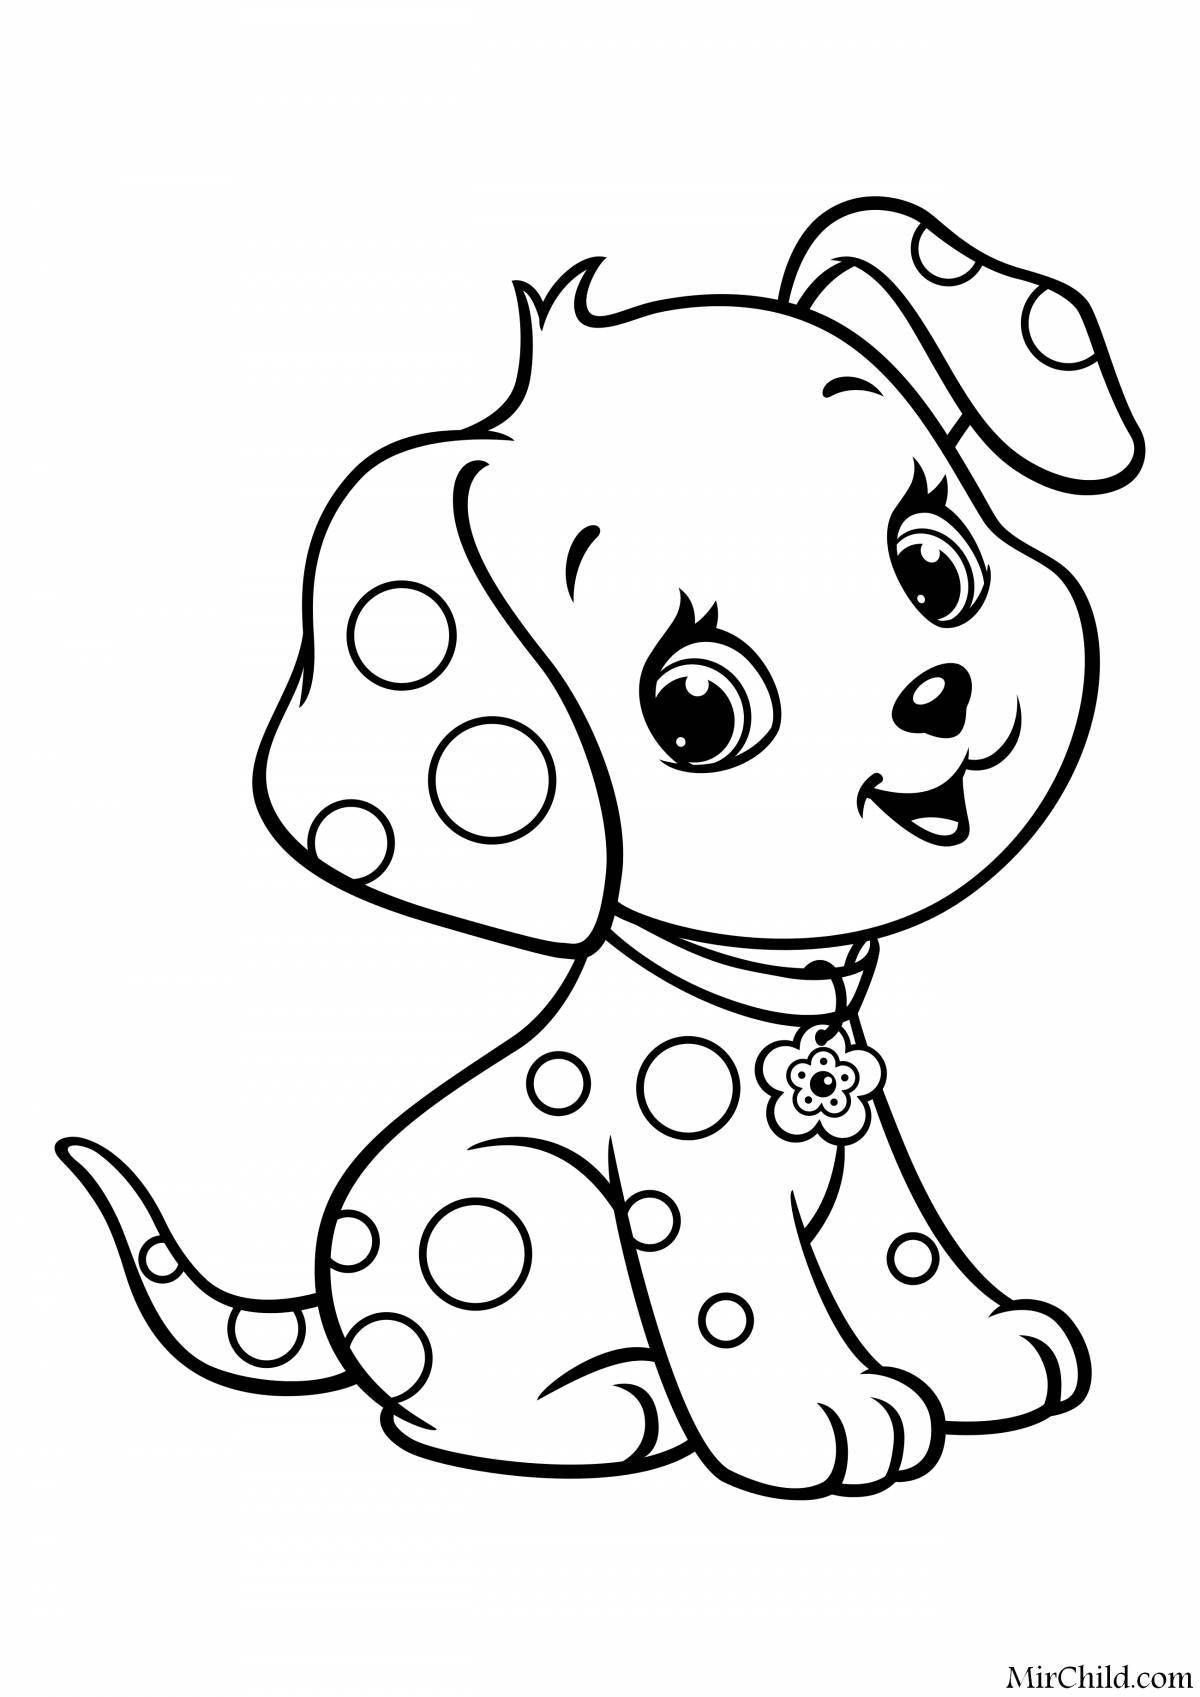 Puppy waggish coloring page